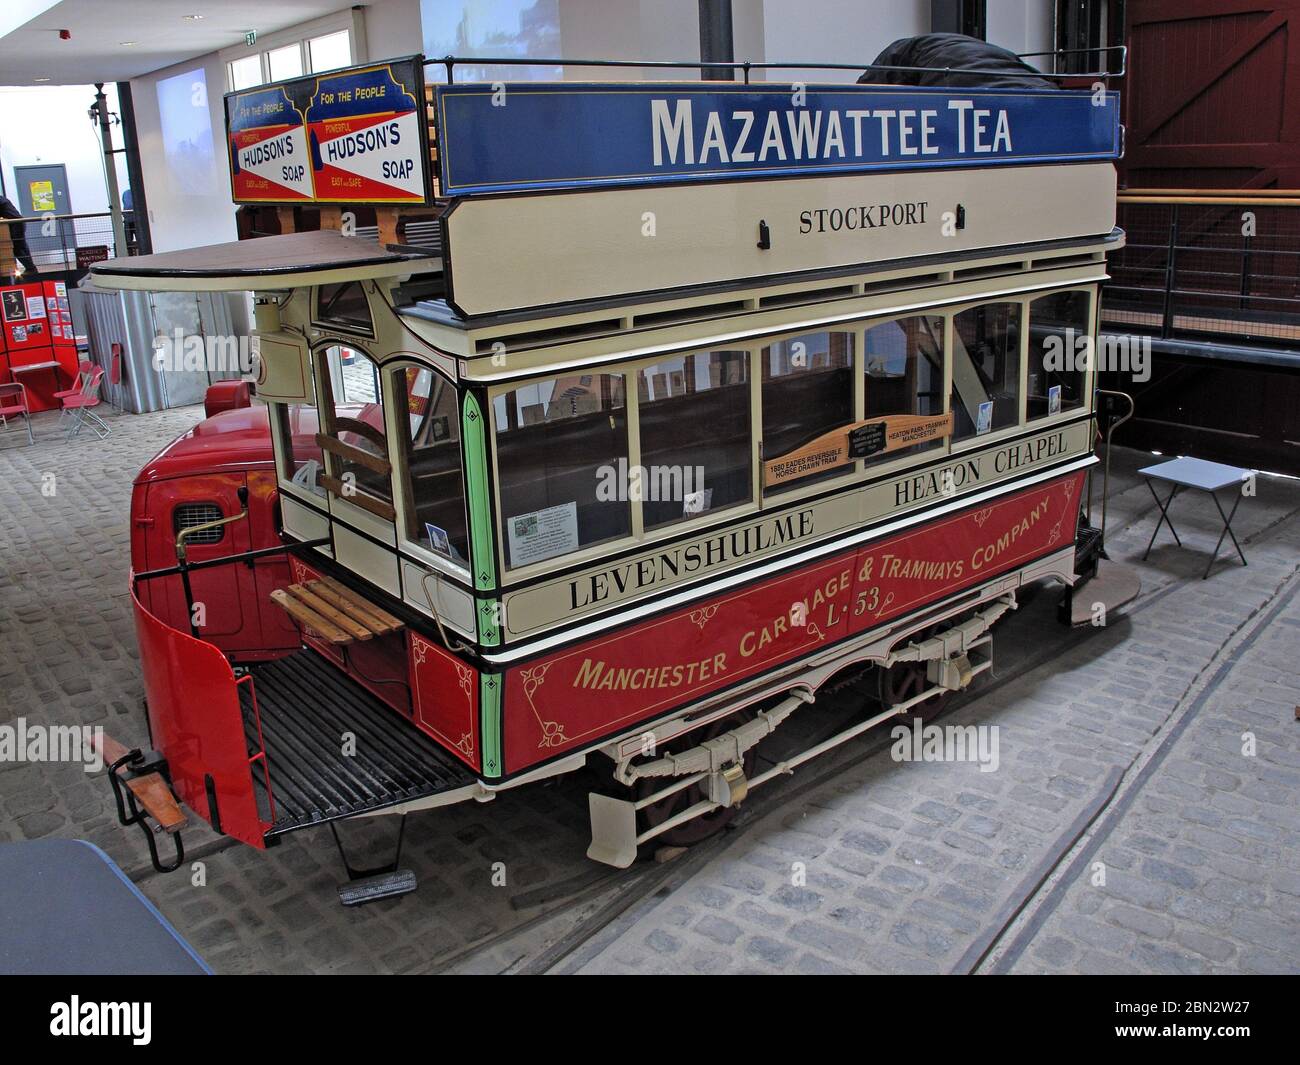 Levenshulme Tram, Heaton Chapel, Stockport, bus 192,192, tram 192, thé Mazawattee, Hudsons SOAP, Manchester Carriage & Tramways Company Banque D'Images